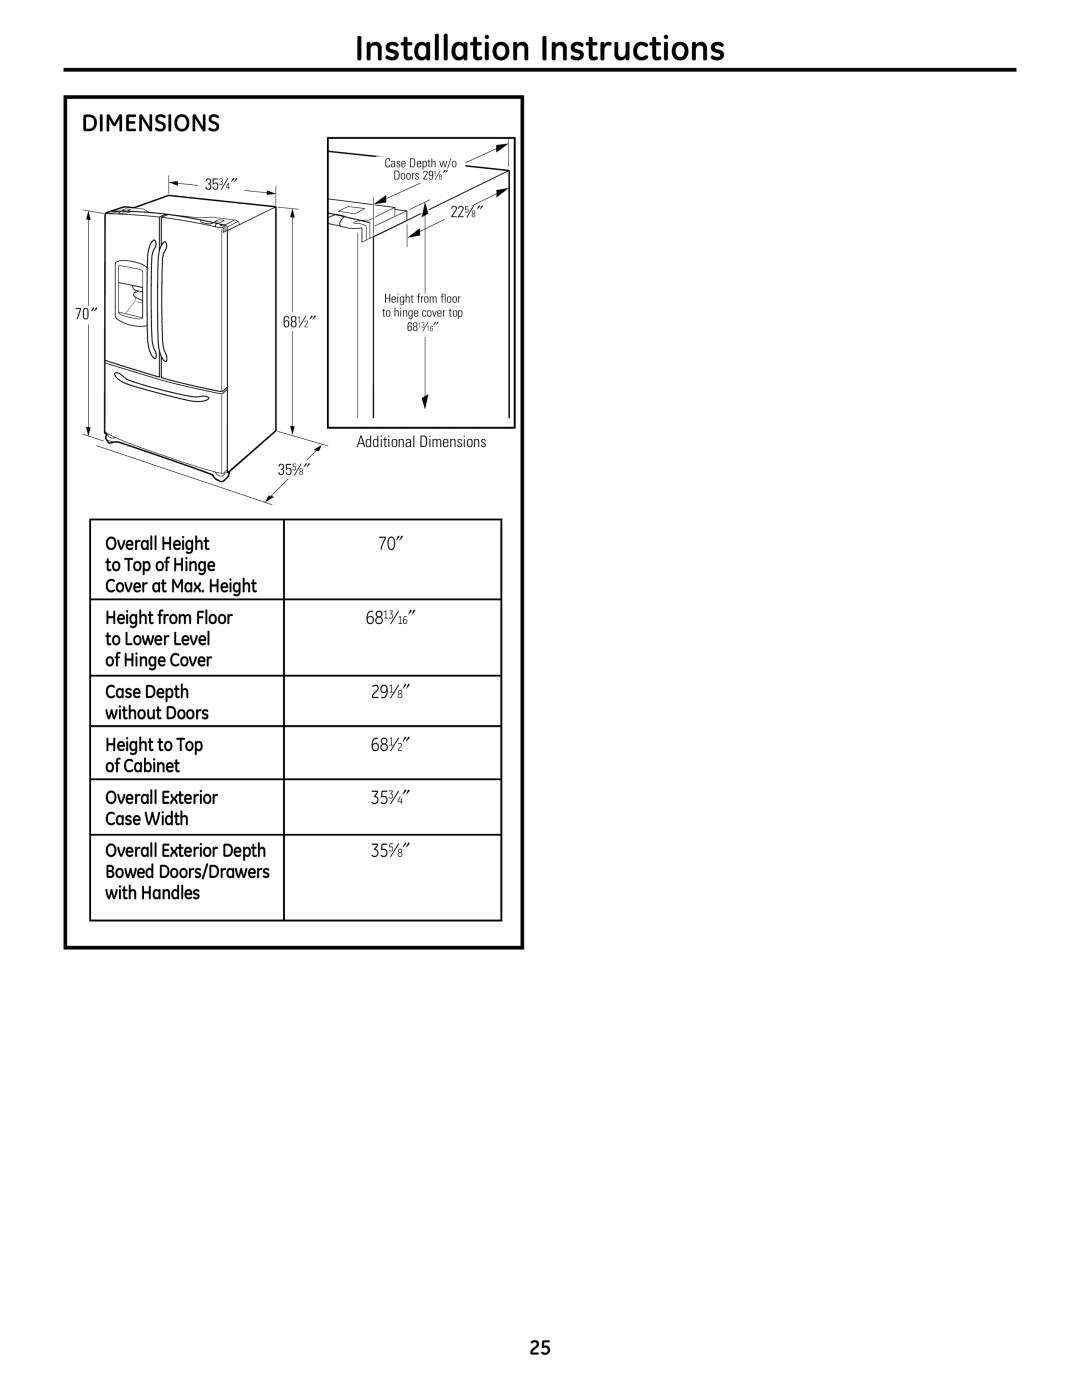 GE PFSS6SMXSS Installation Instructions, Dimensions, Overall Height, to Top of Hinge, Height from Floor, 6813⁄, Case Depth 